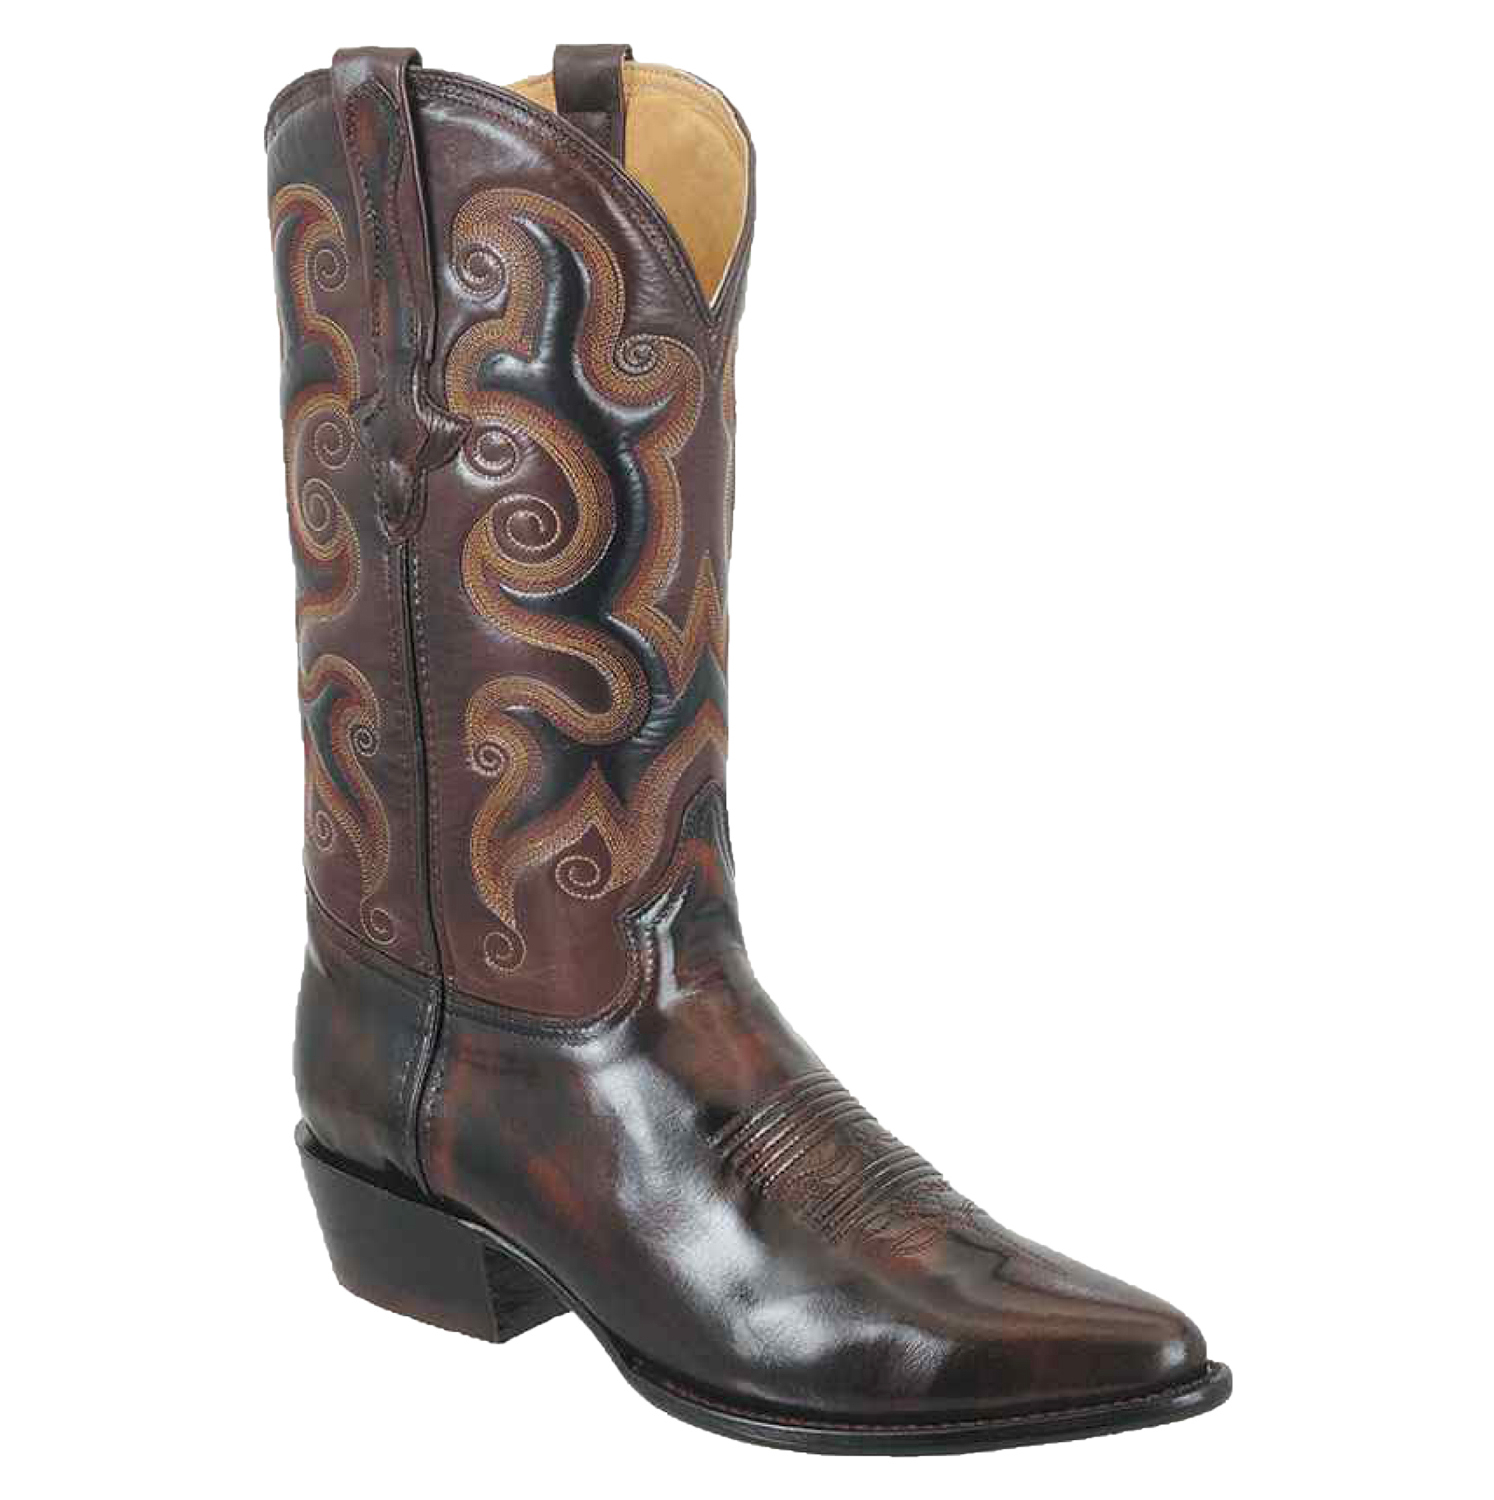 Picture Of Cowboy Boots - ClipArt Best